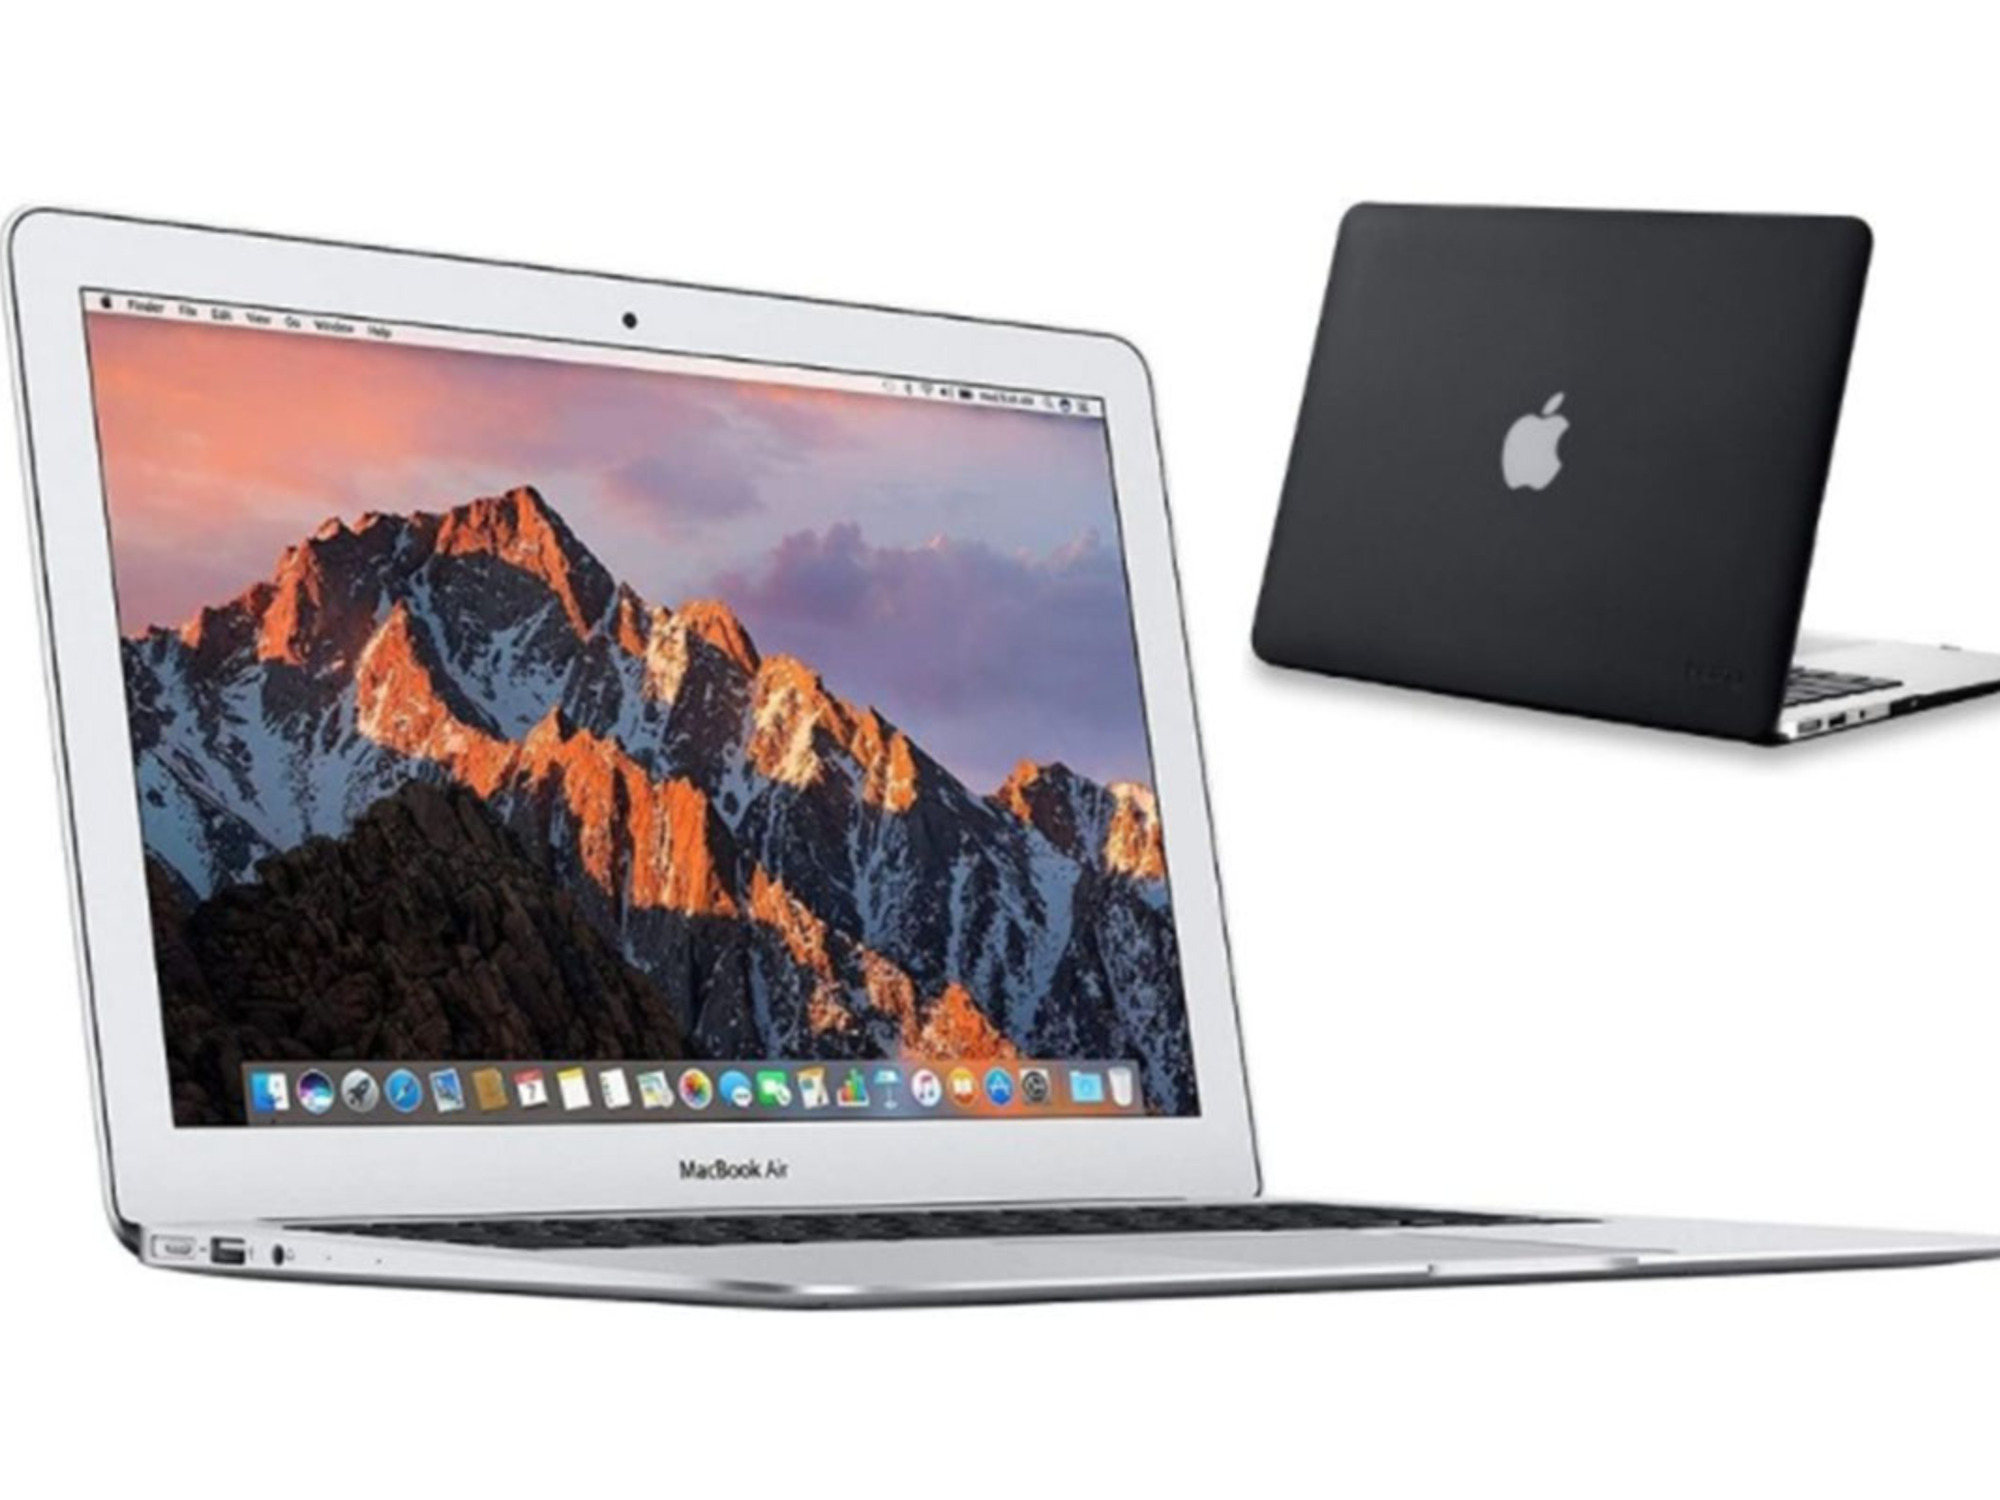 Save 75 percent on this refurbished MacBook Air that comes with a case